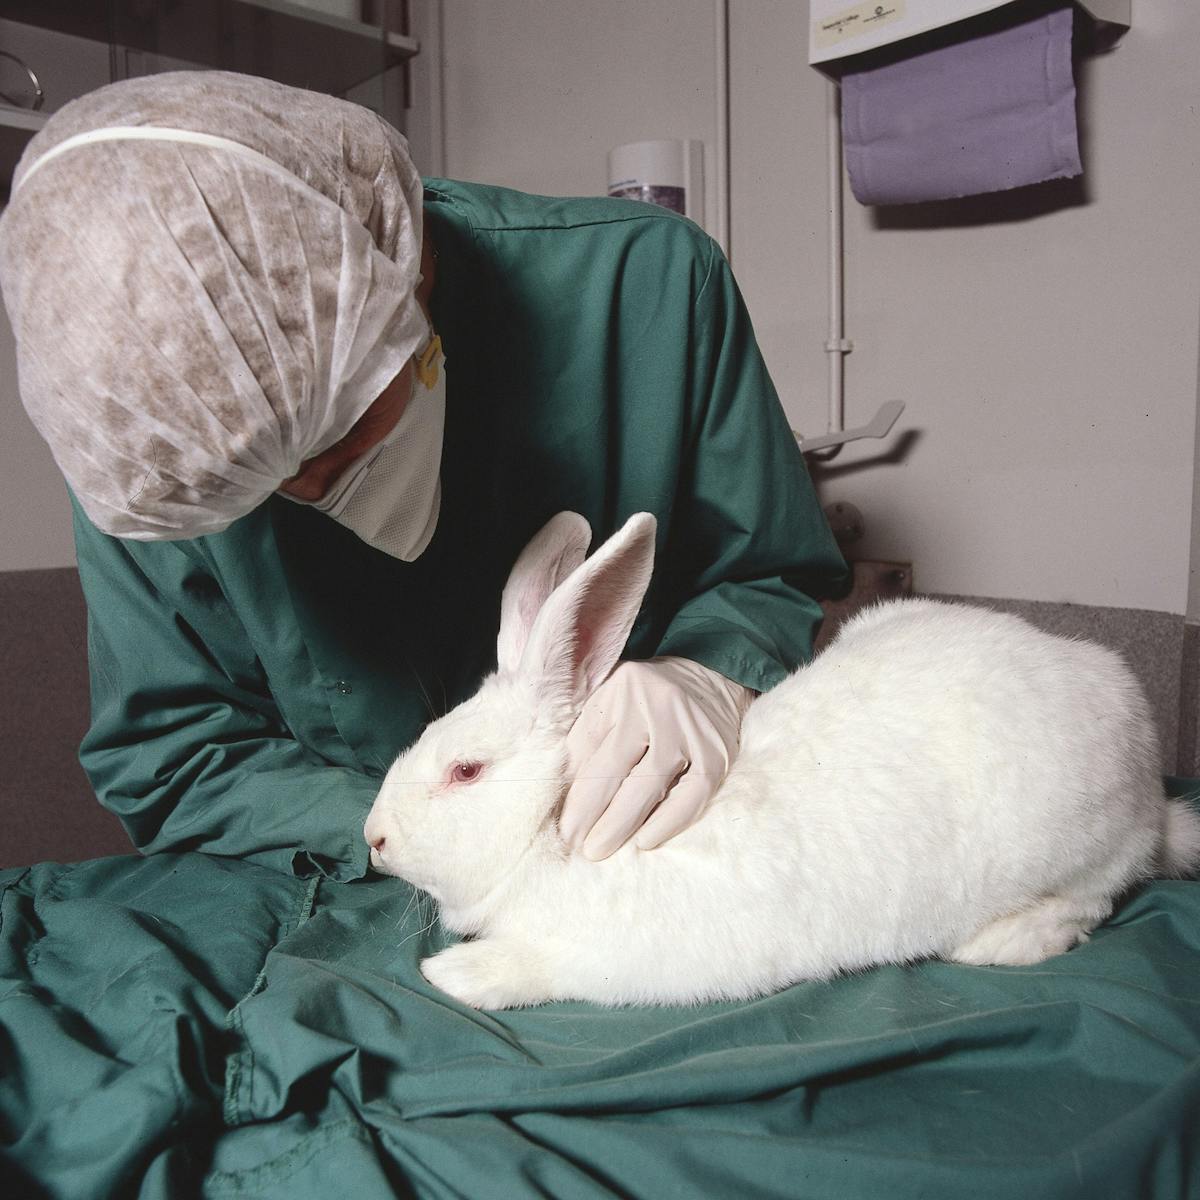 Animal research: varying standards are leading to bad science